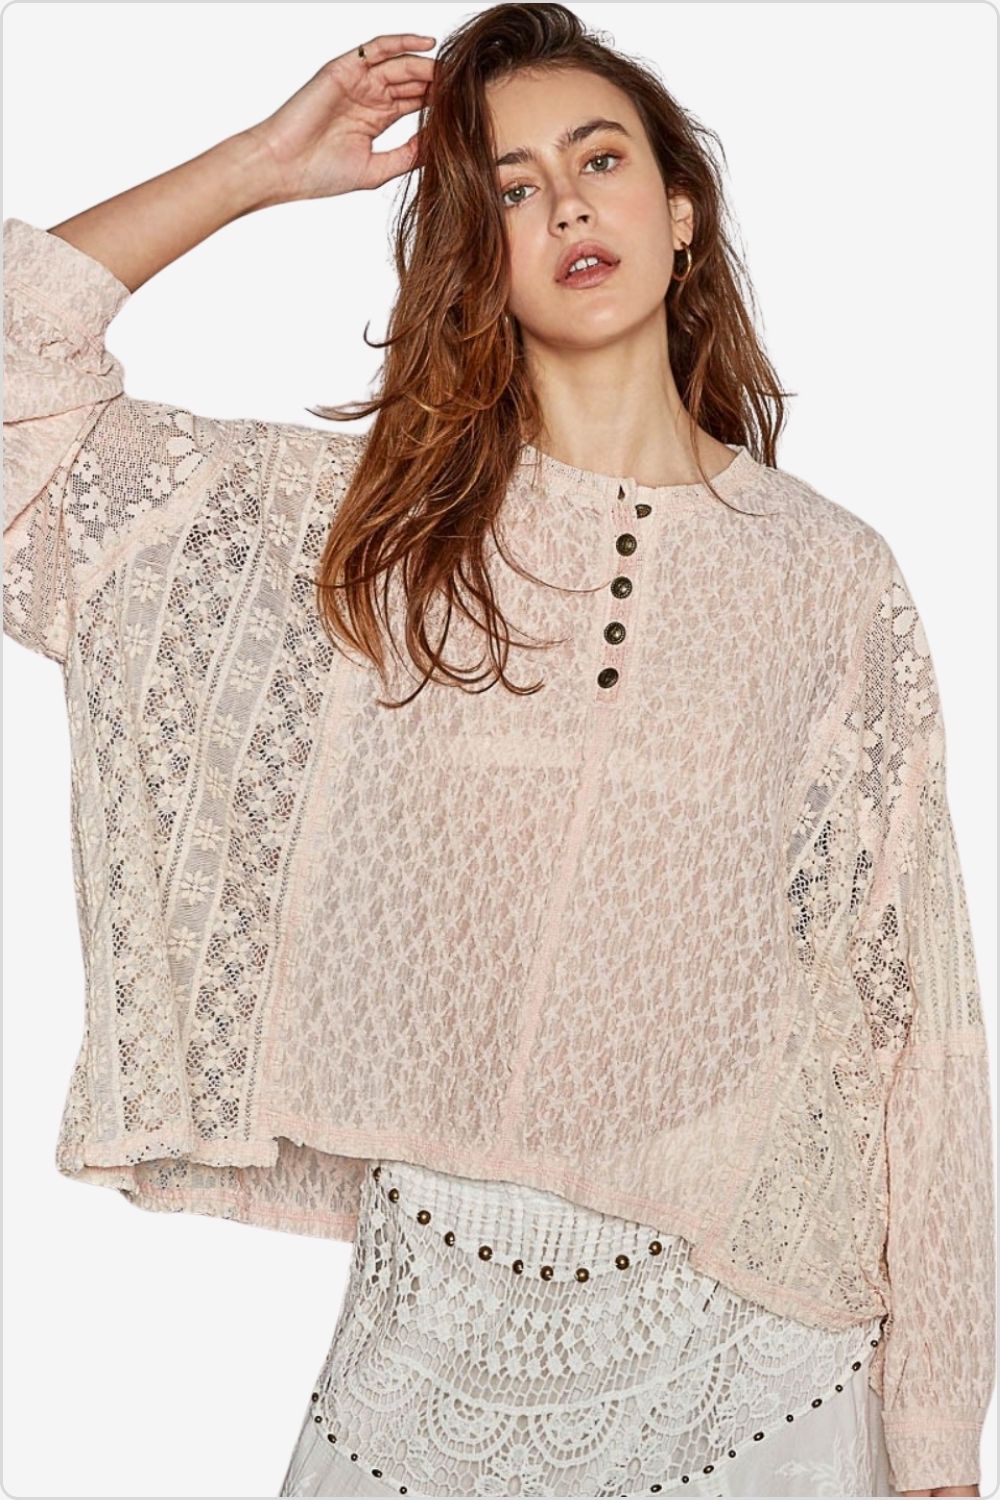 Fashionable oversized top with balloon sleeves and intricate lace details, Color Blush